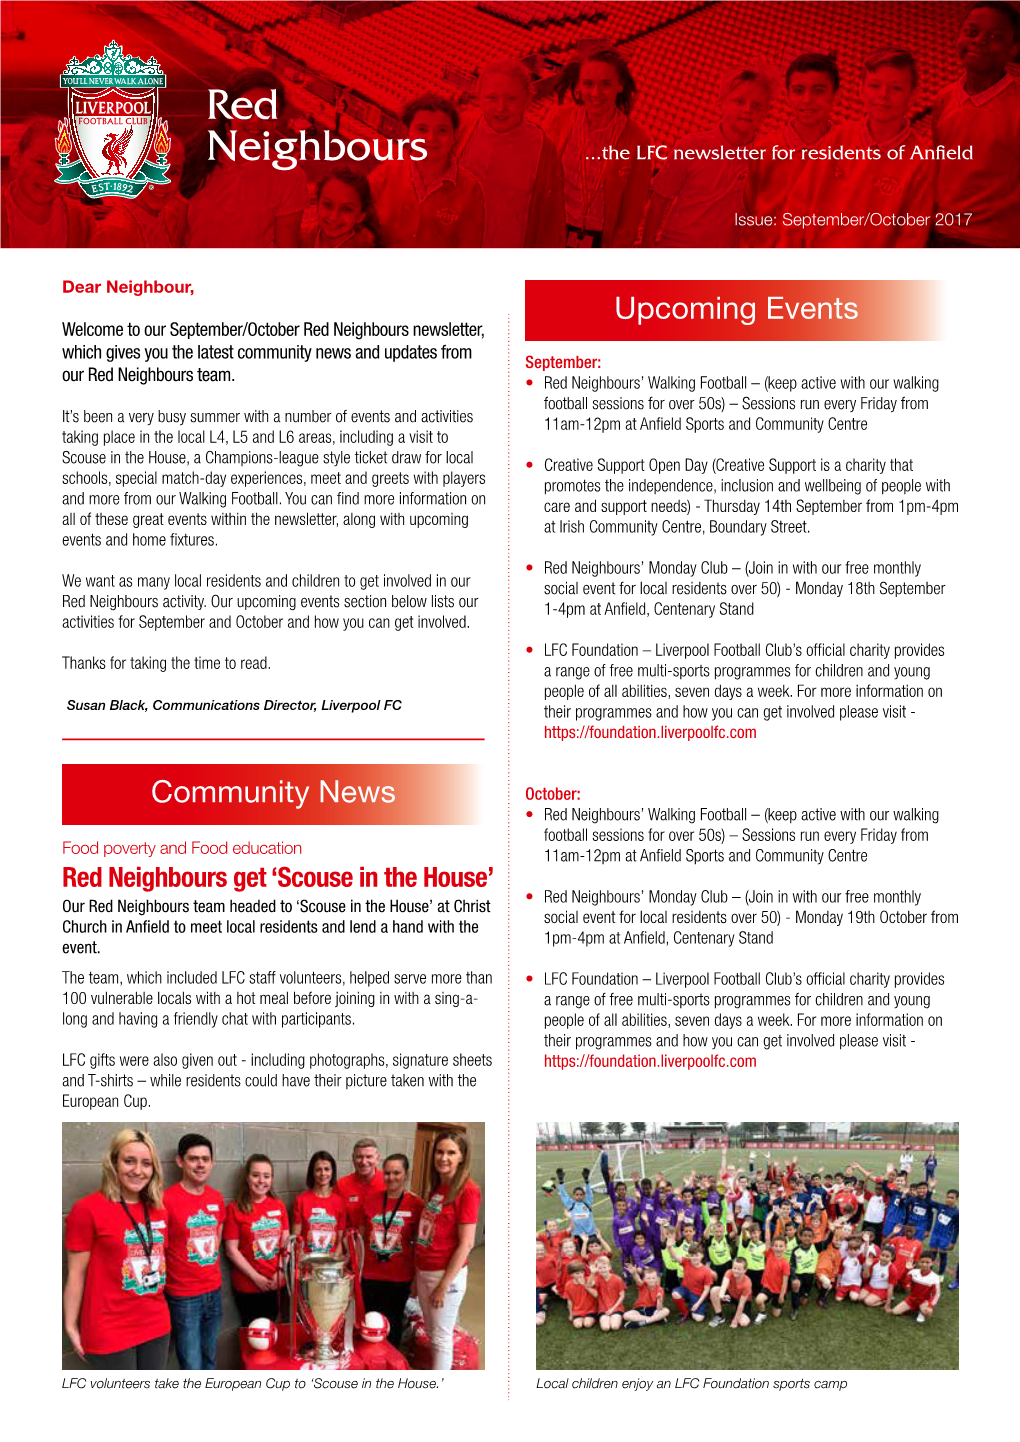 Red Neighbours ...The LFC Newsletter for Residents of Anfield